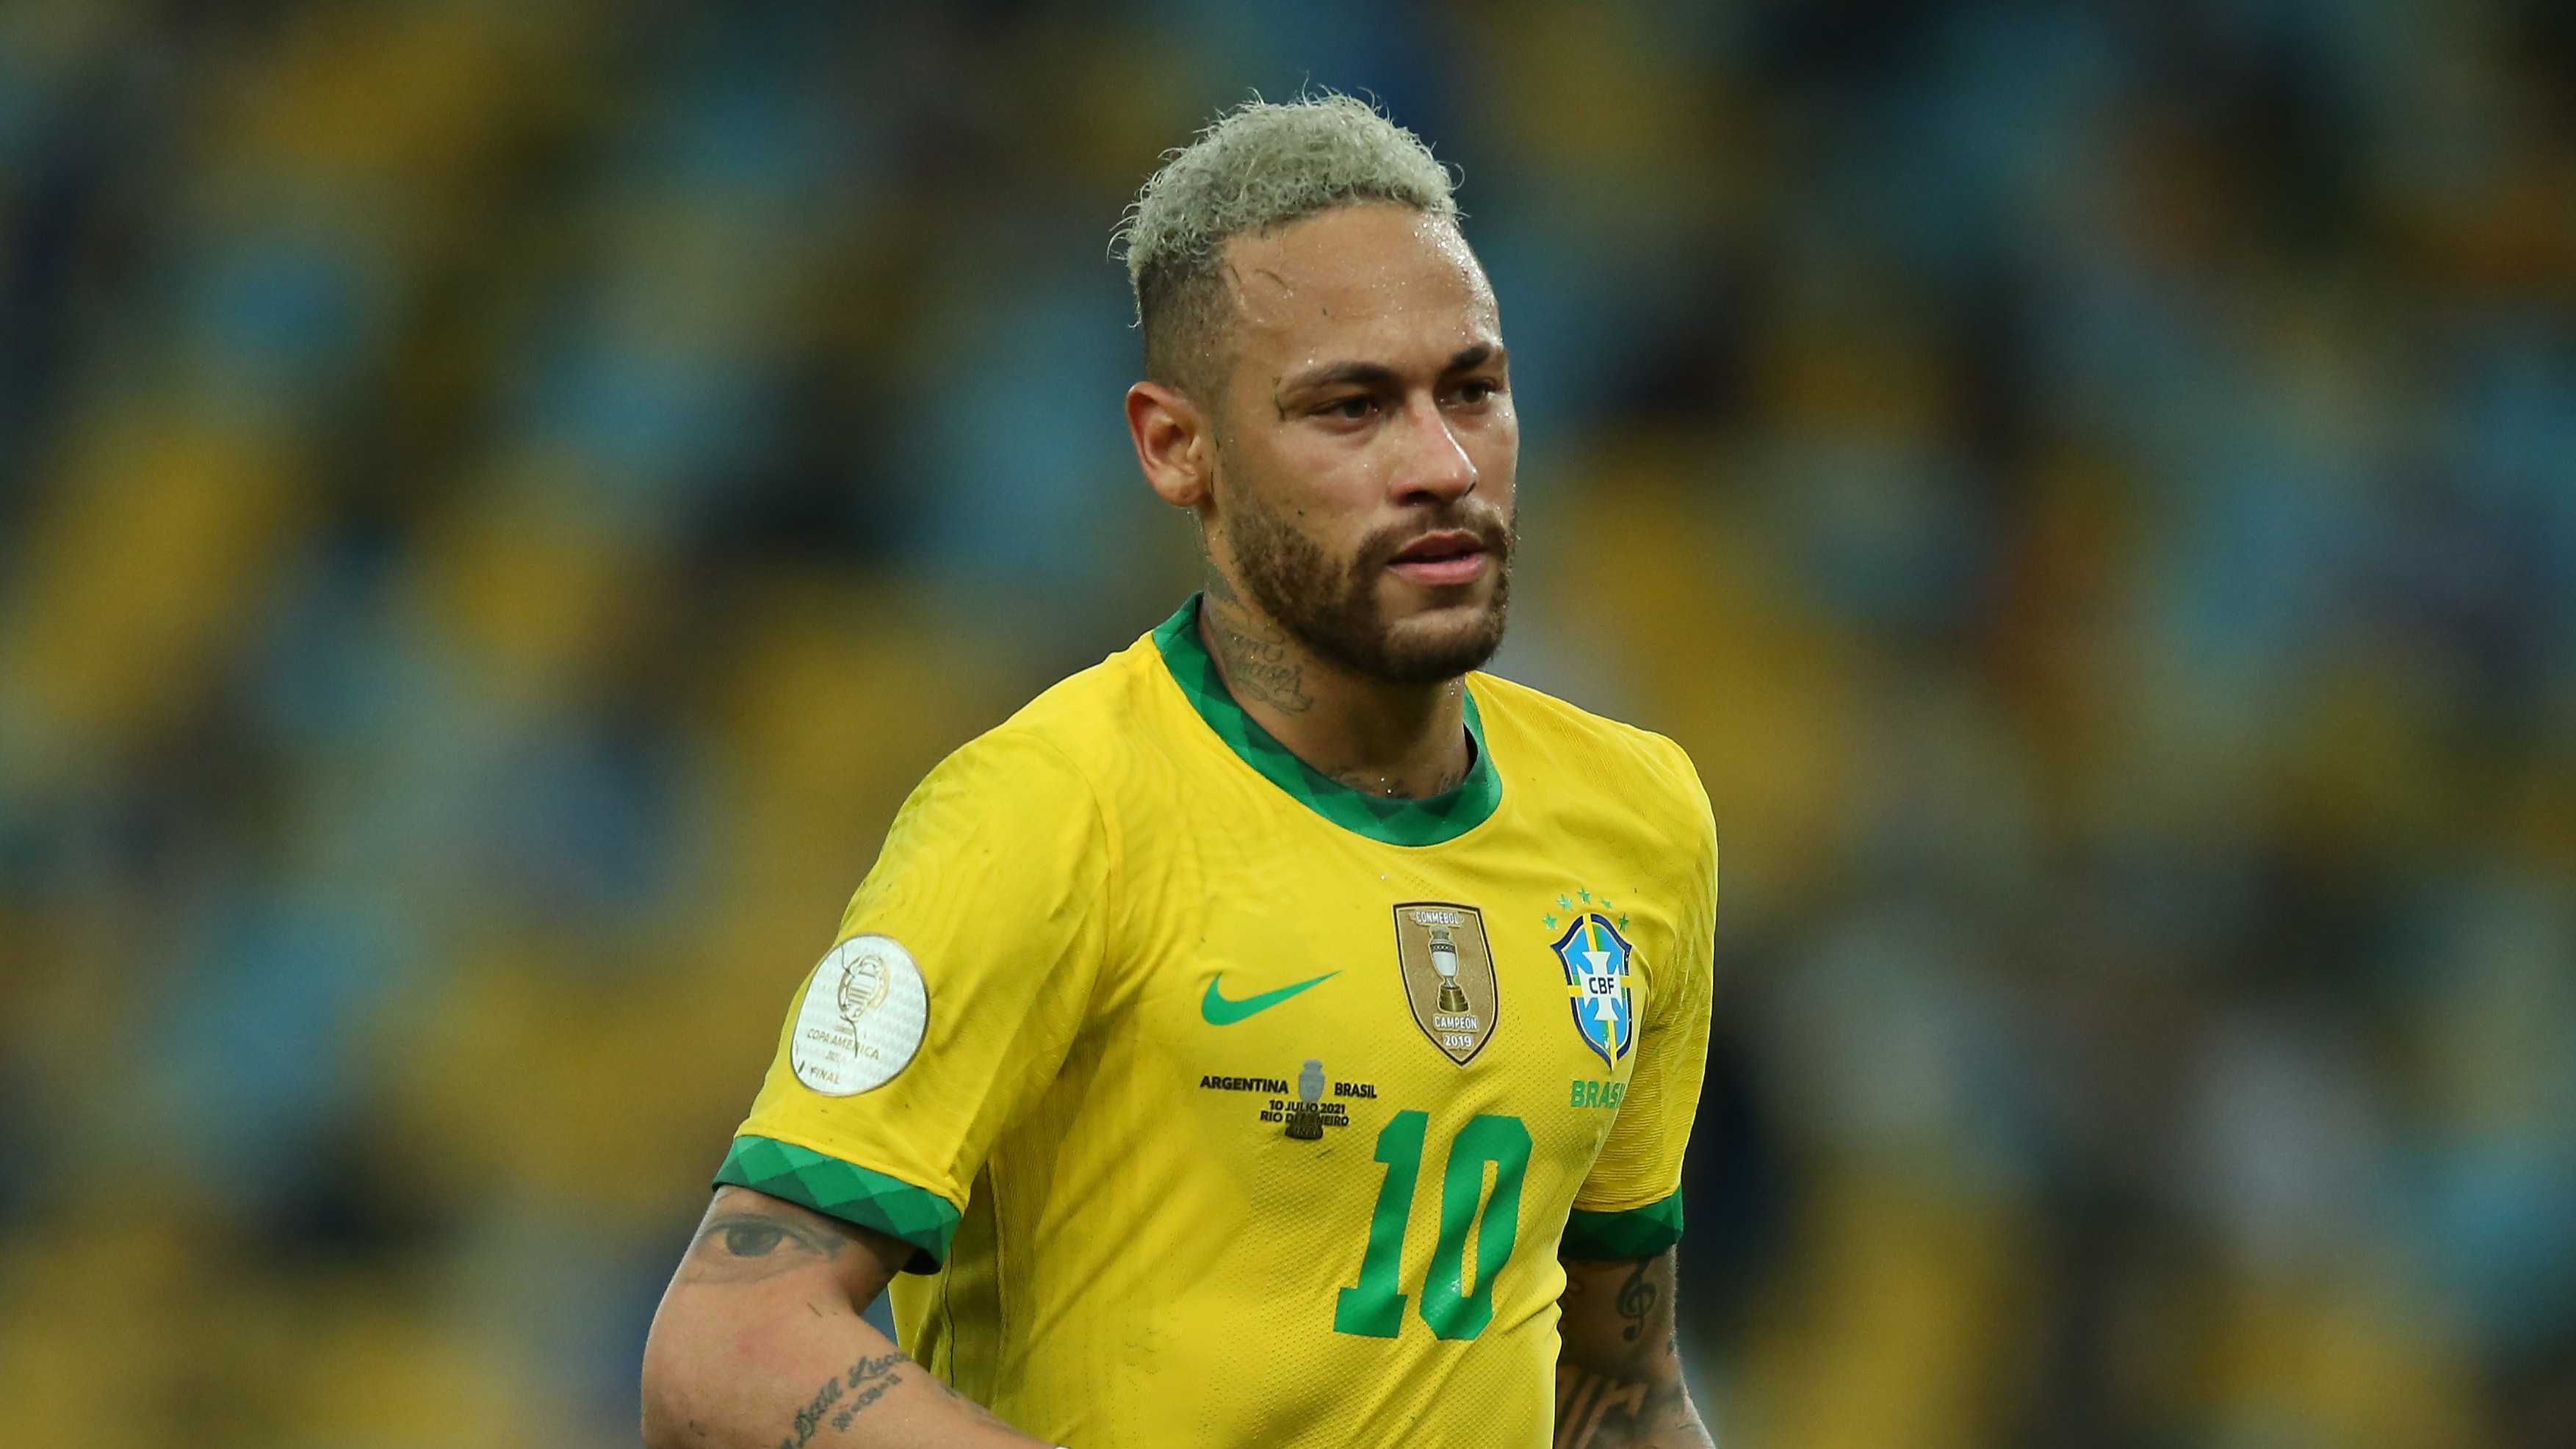 2026 World Cup Odds: Favorite Brazil Given 10% Chance to win 2026 World Cup